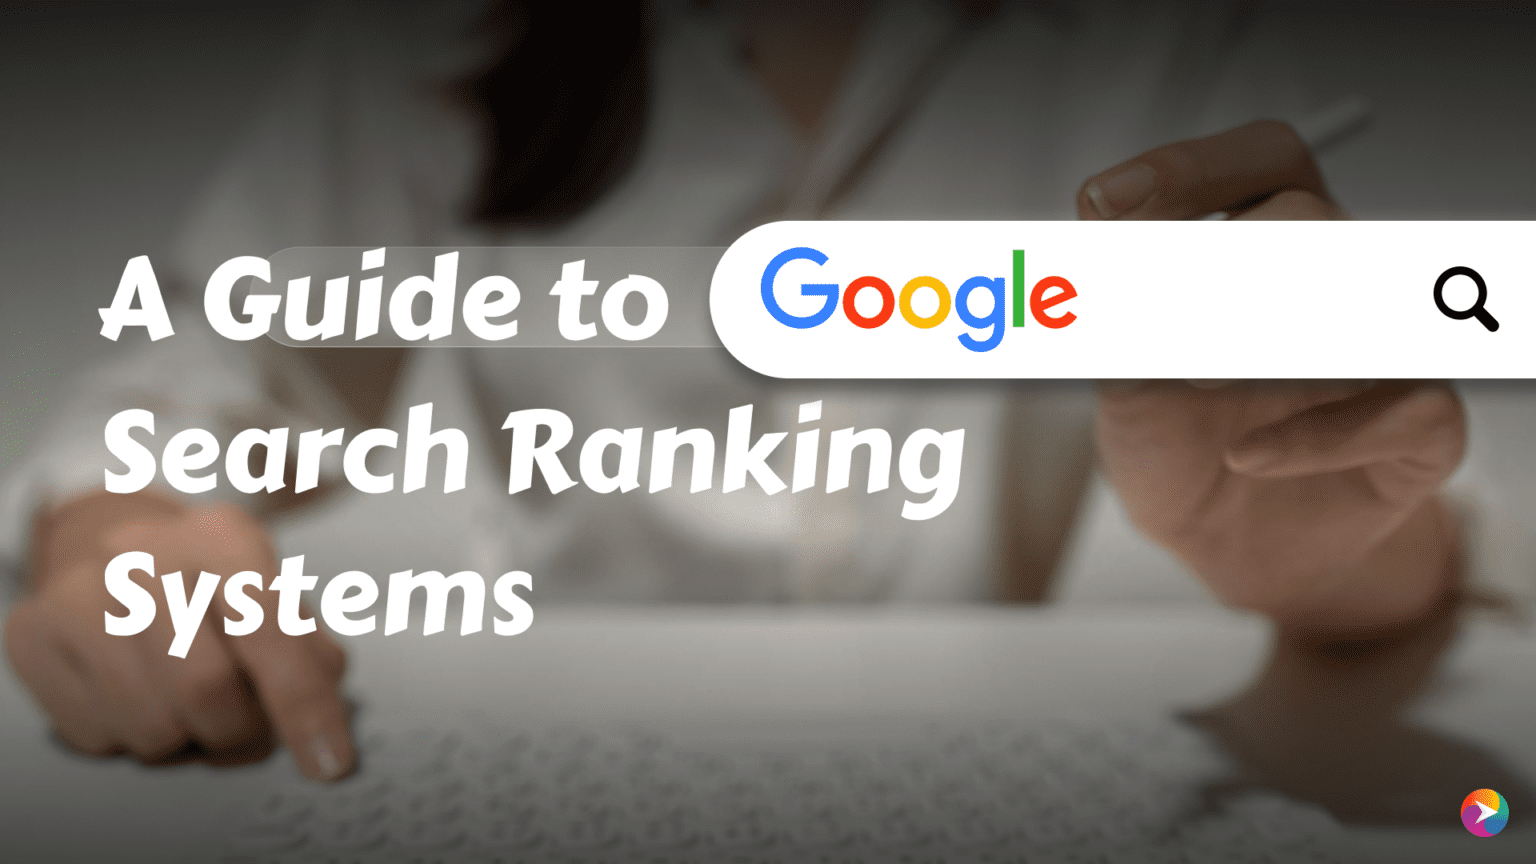 A Guide to Google Search Ranking Systems